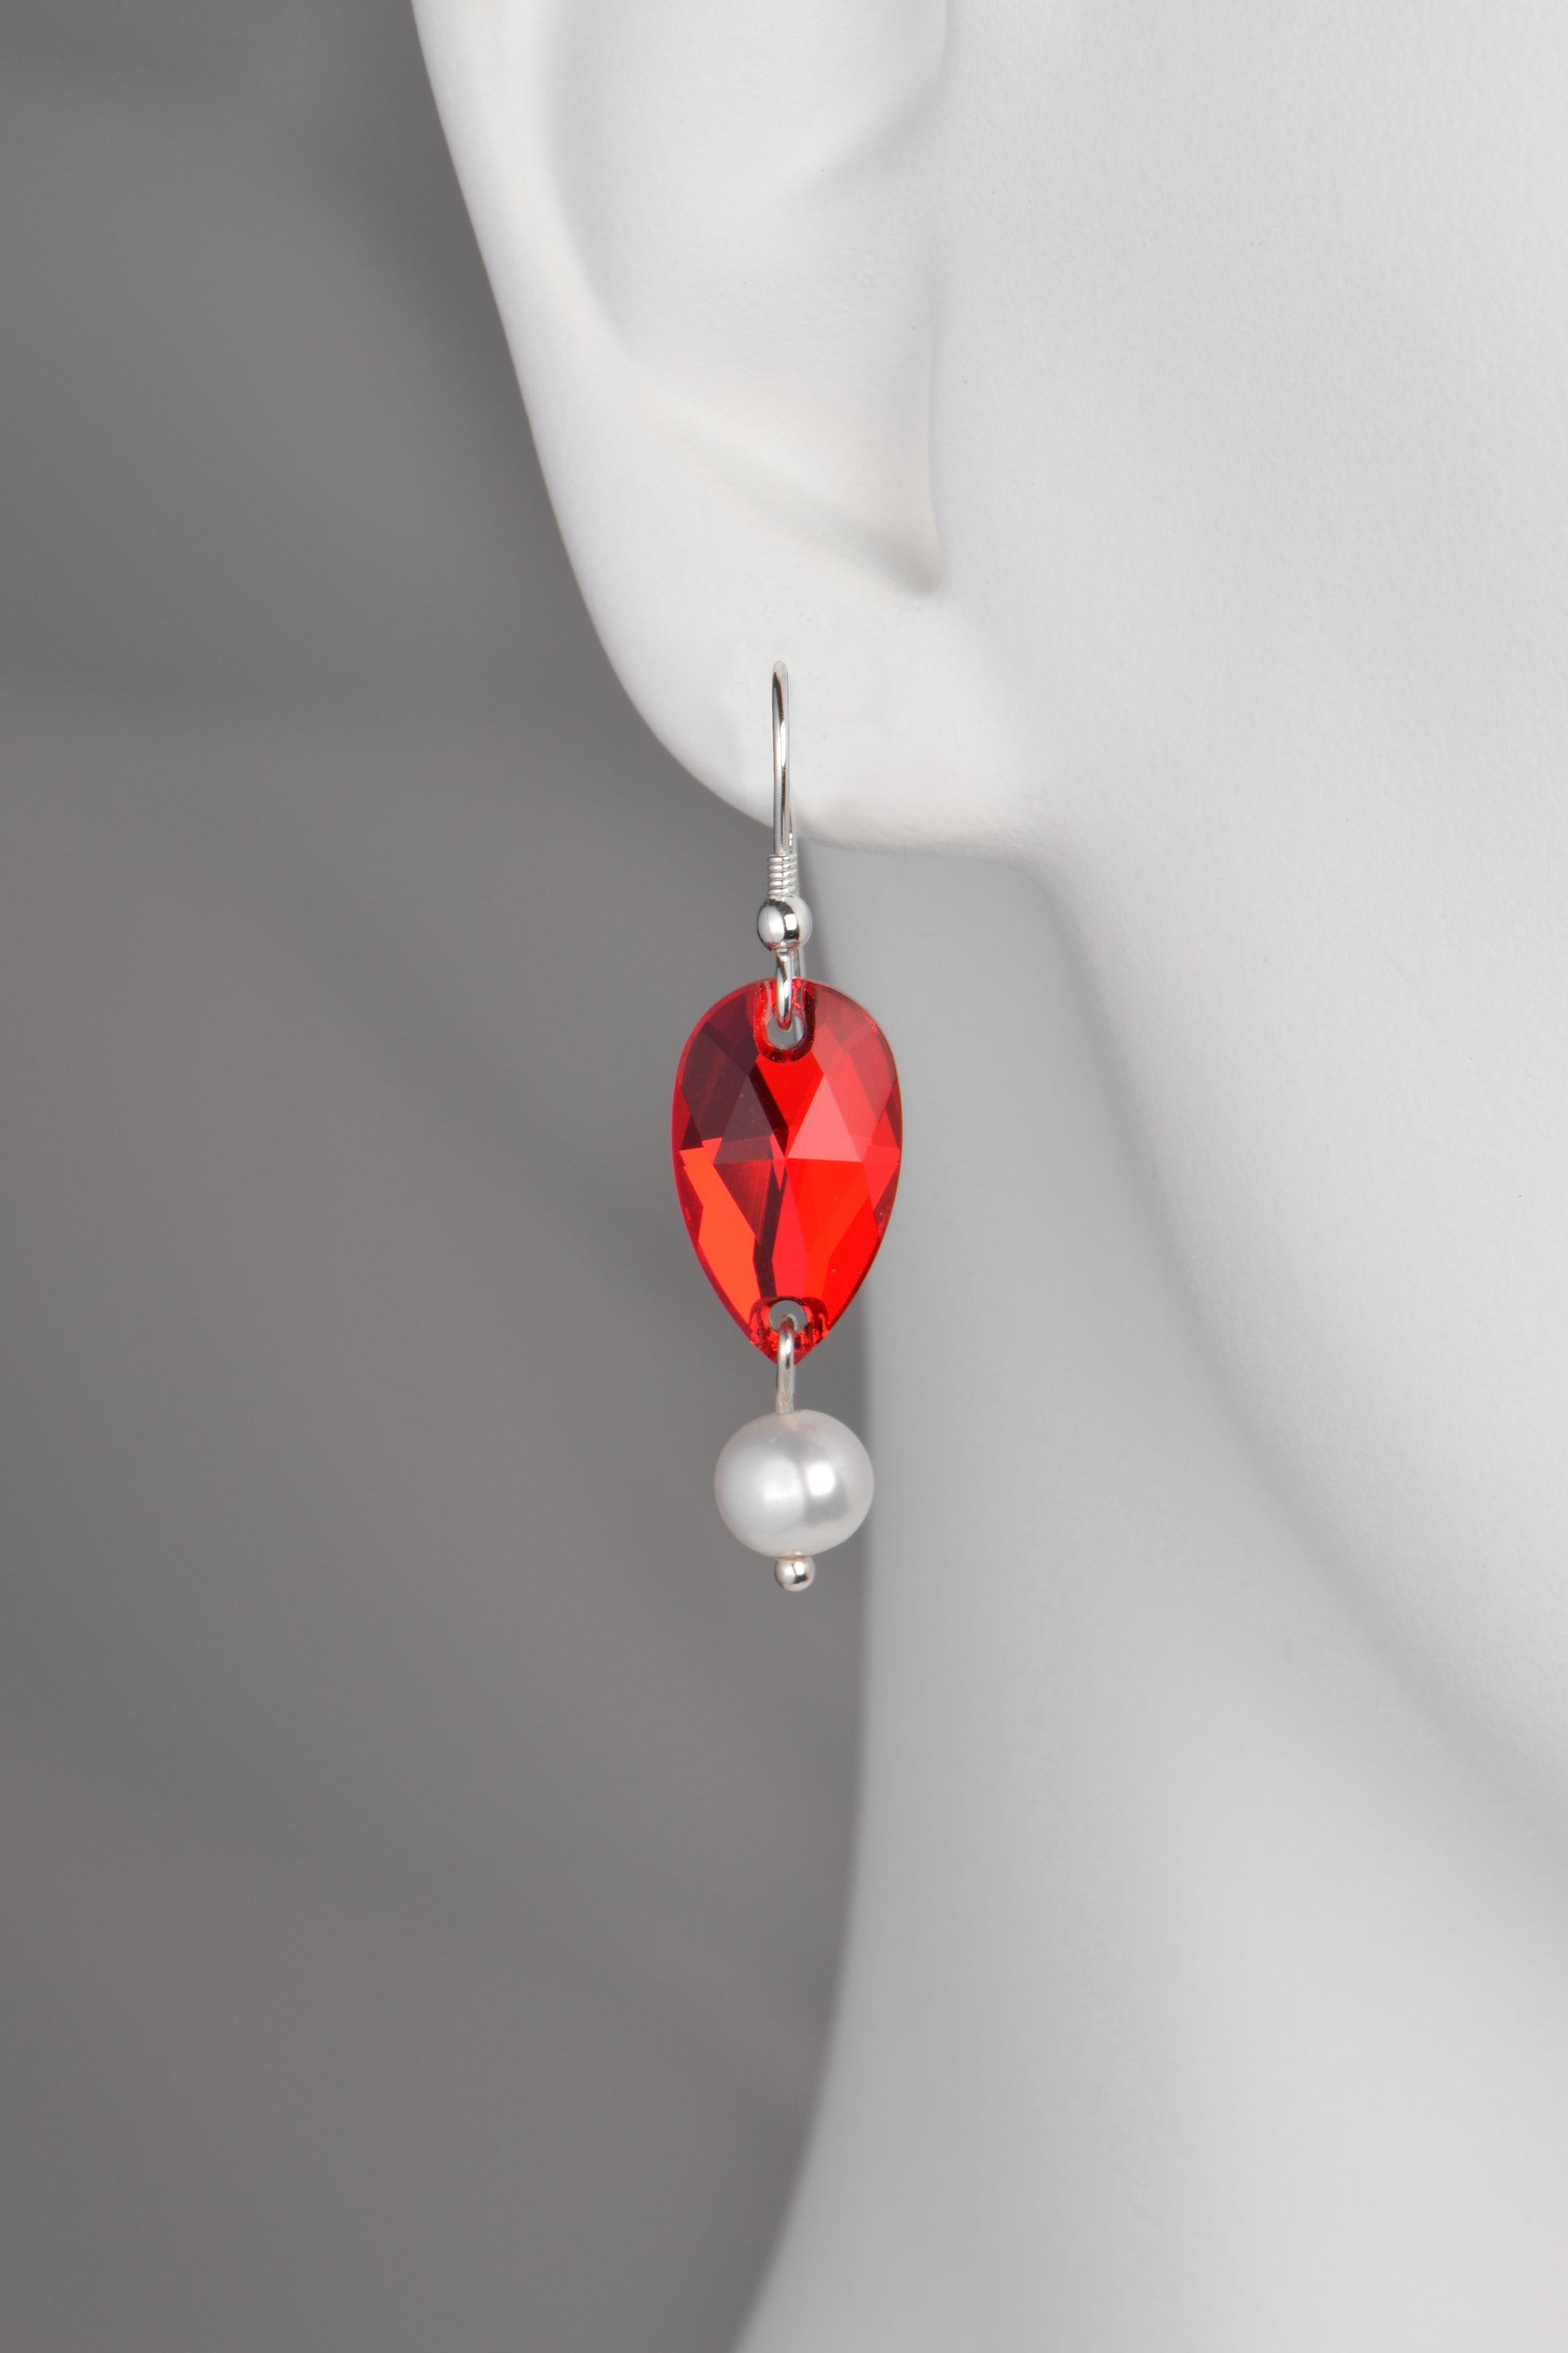 sterling silver hook earrings with a red teardrop shaped austrian crystal and a single round cultured pearl below it in a hot air balloon shape